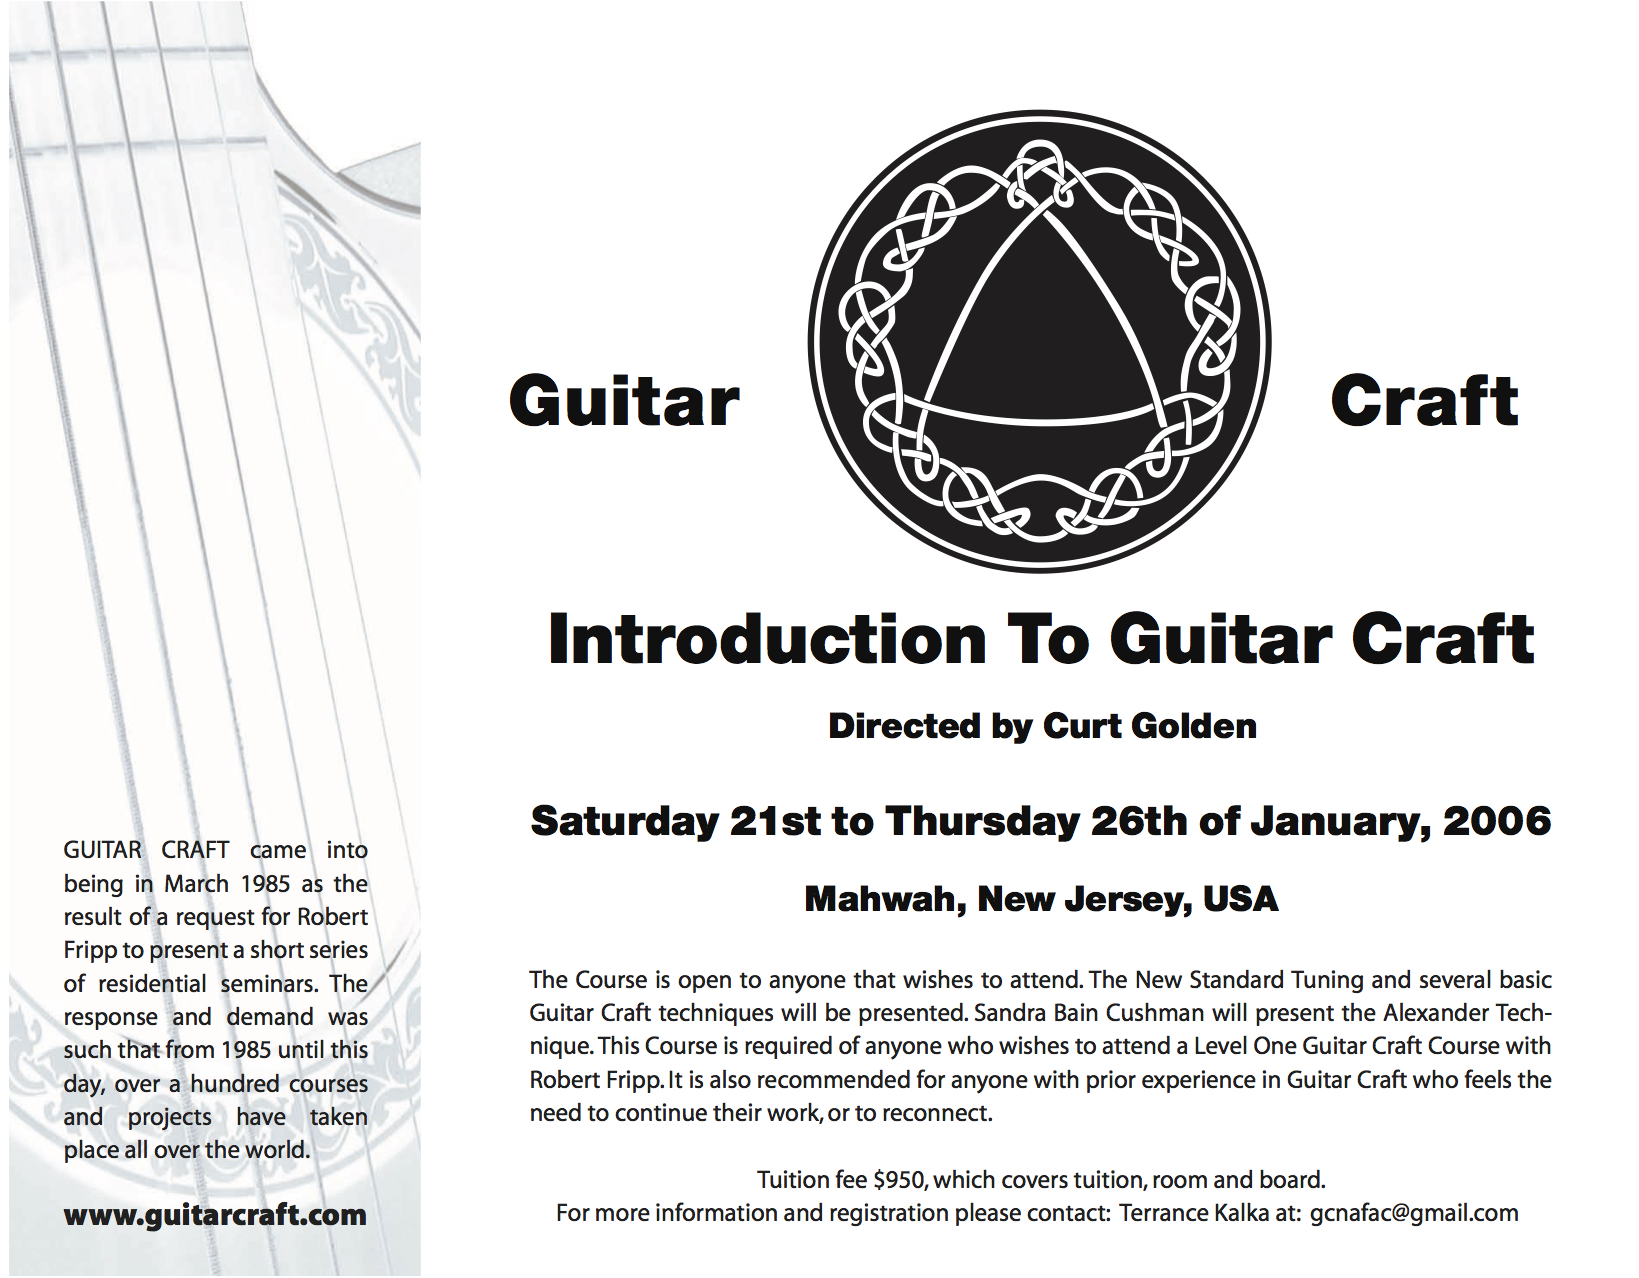 Introduction To Guitar Craft & Introduction To Kitchen Craft